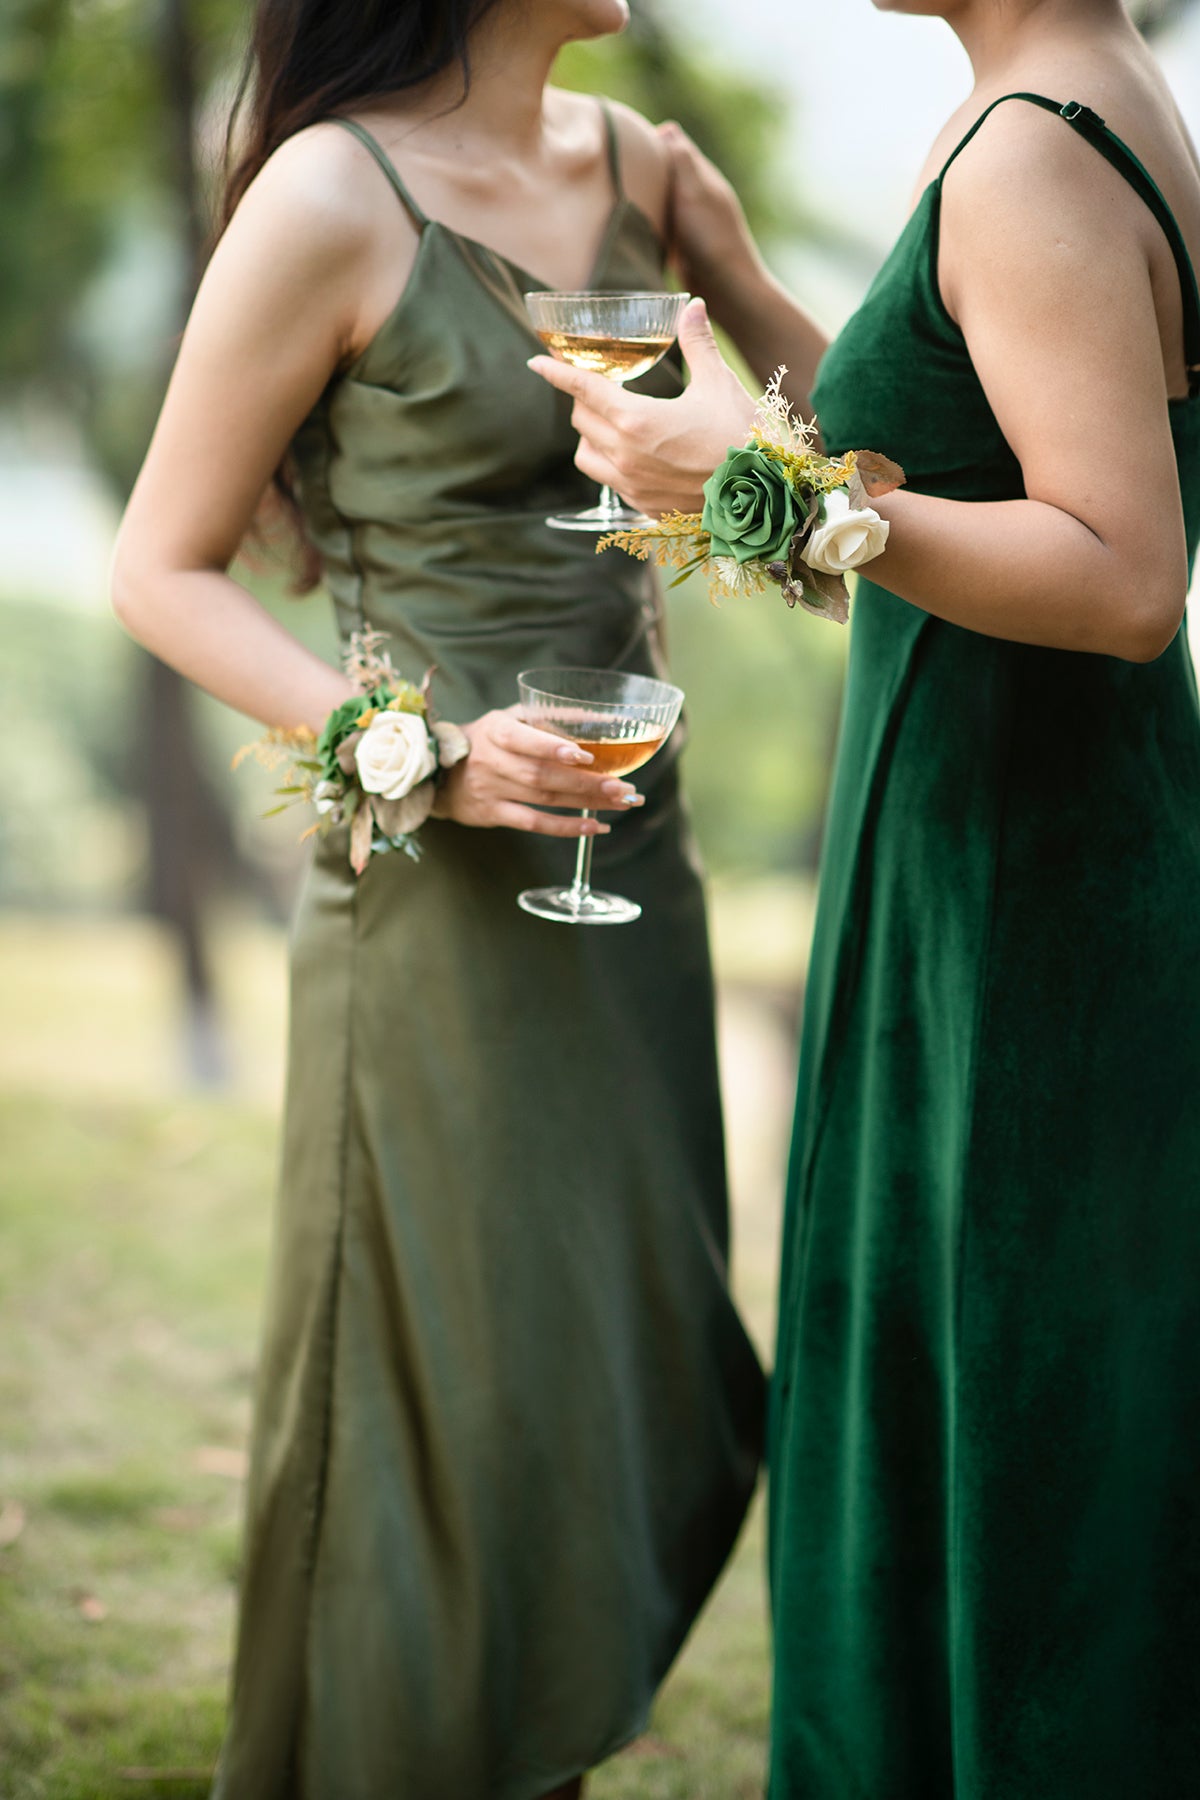 Wrist Corsages in Emerald & Tawny Beige